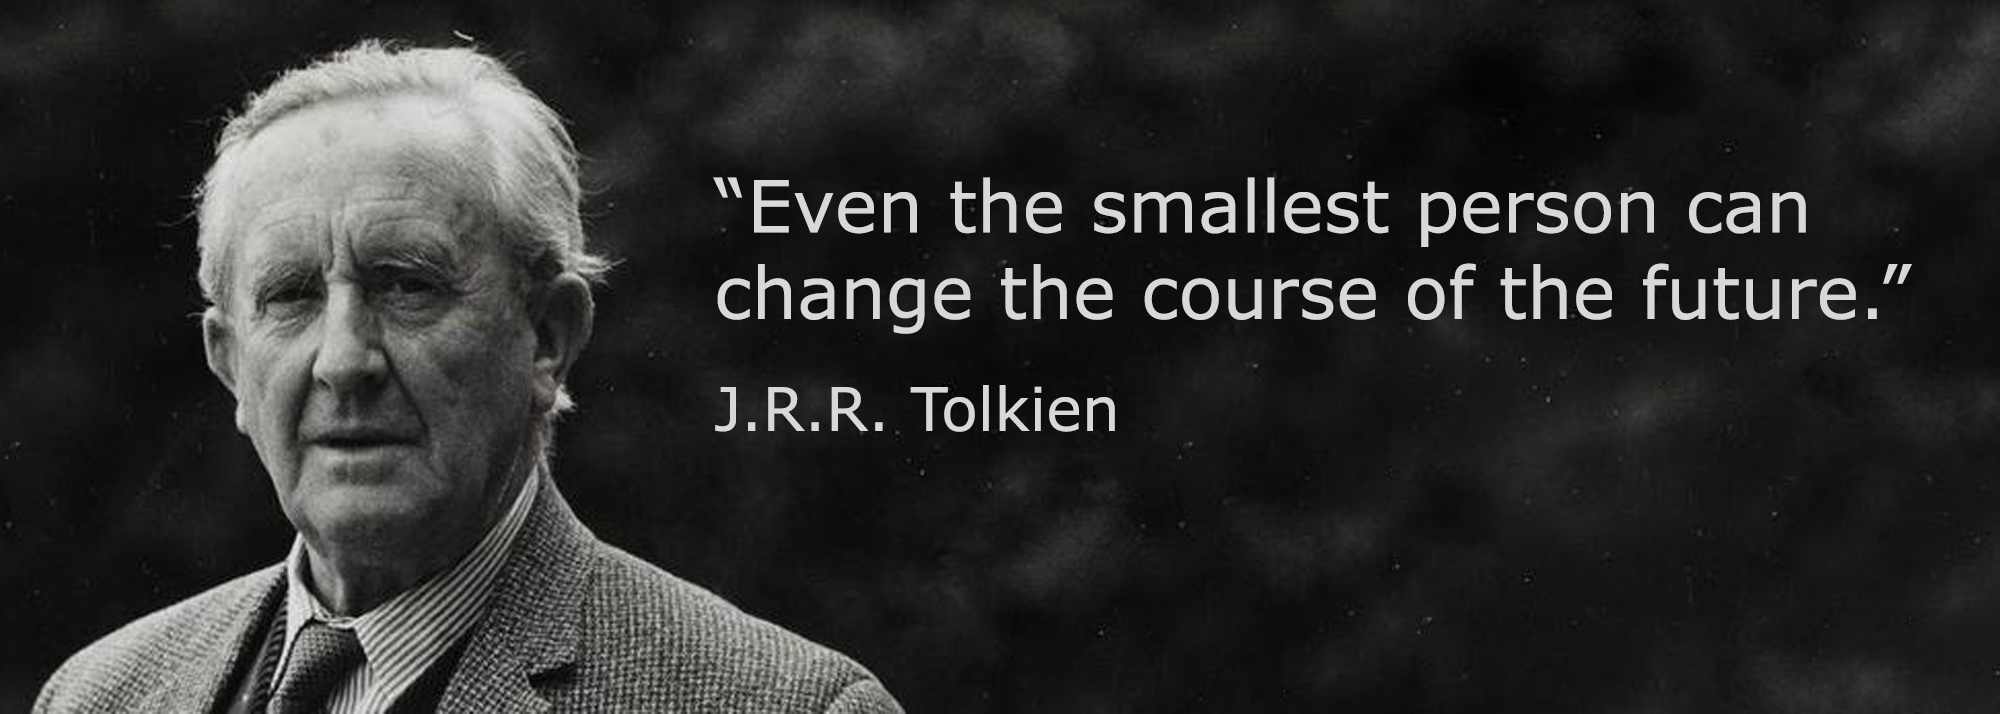 Tolkien Quote: Even the smallest person can change the course of the future.